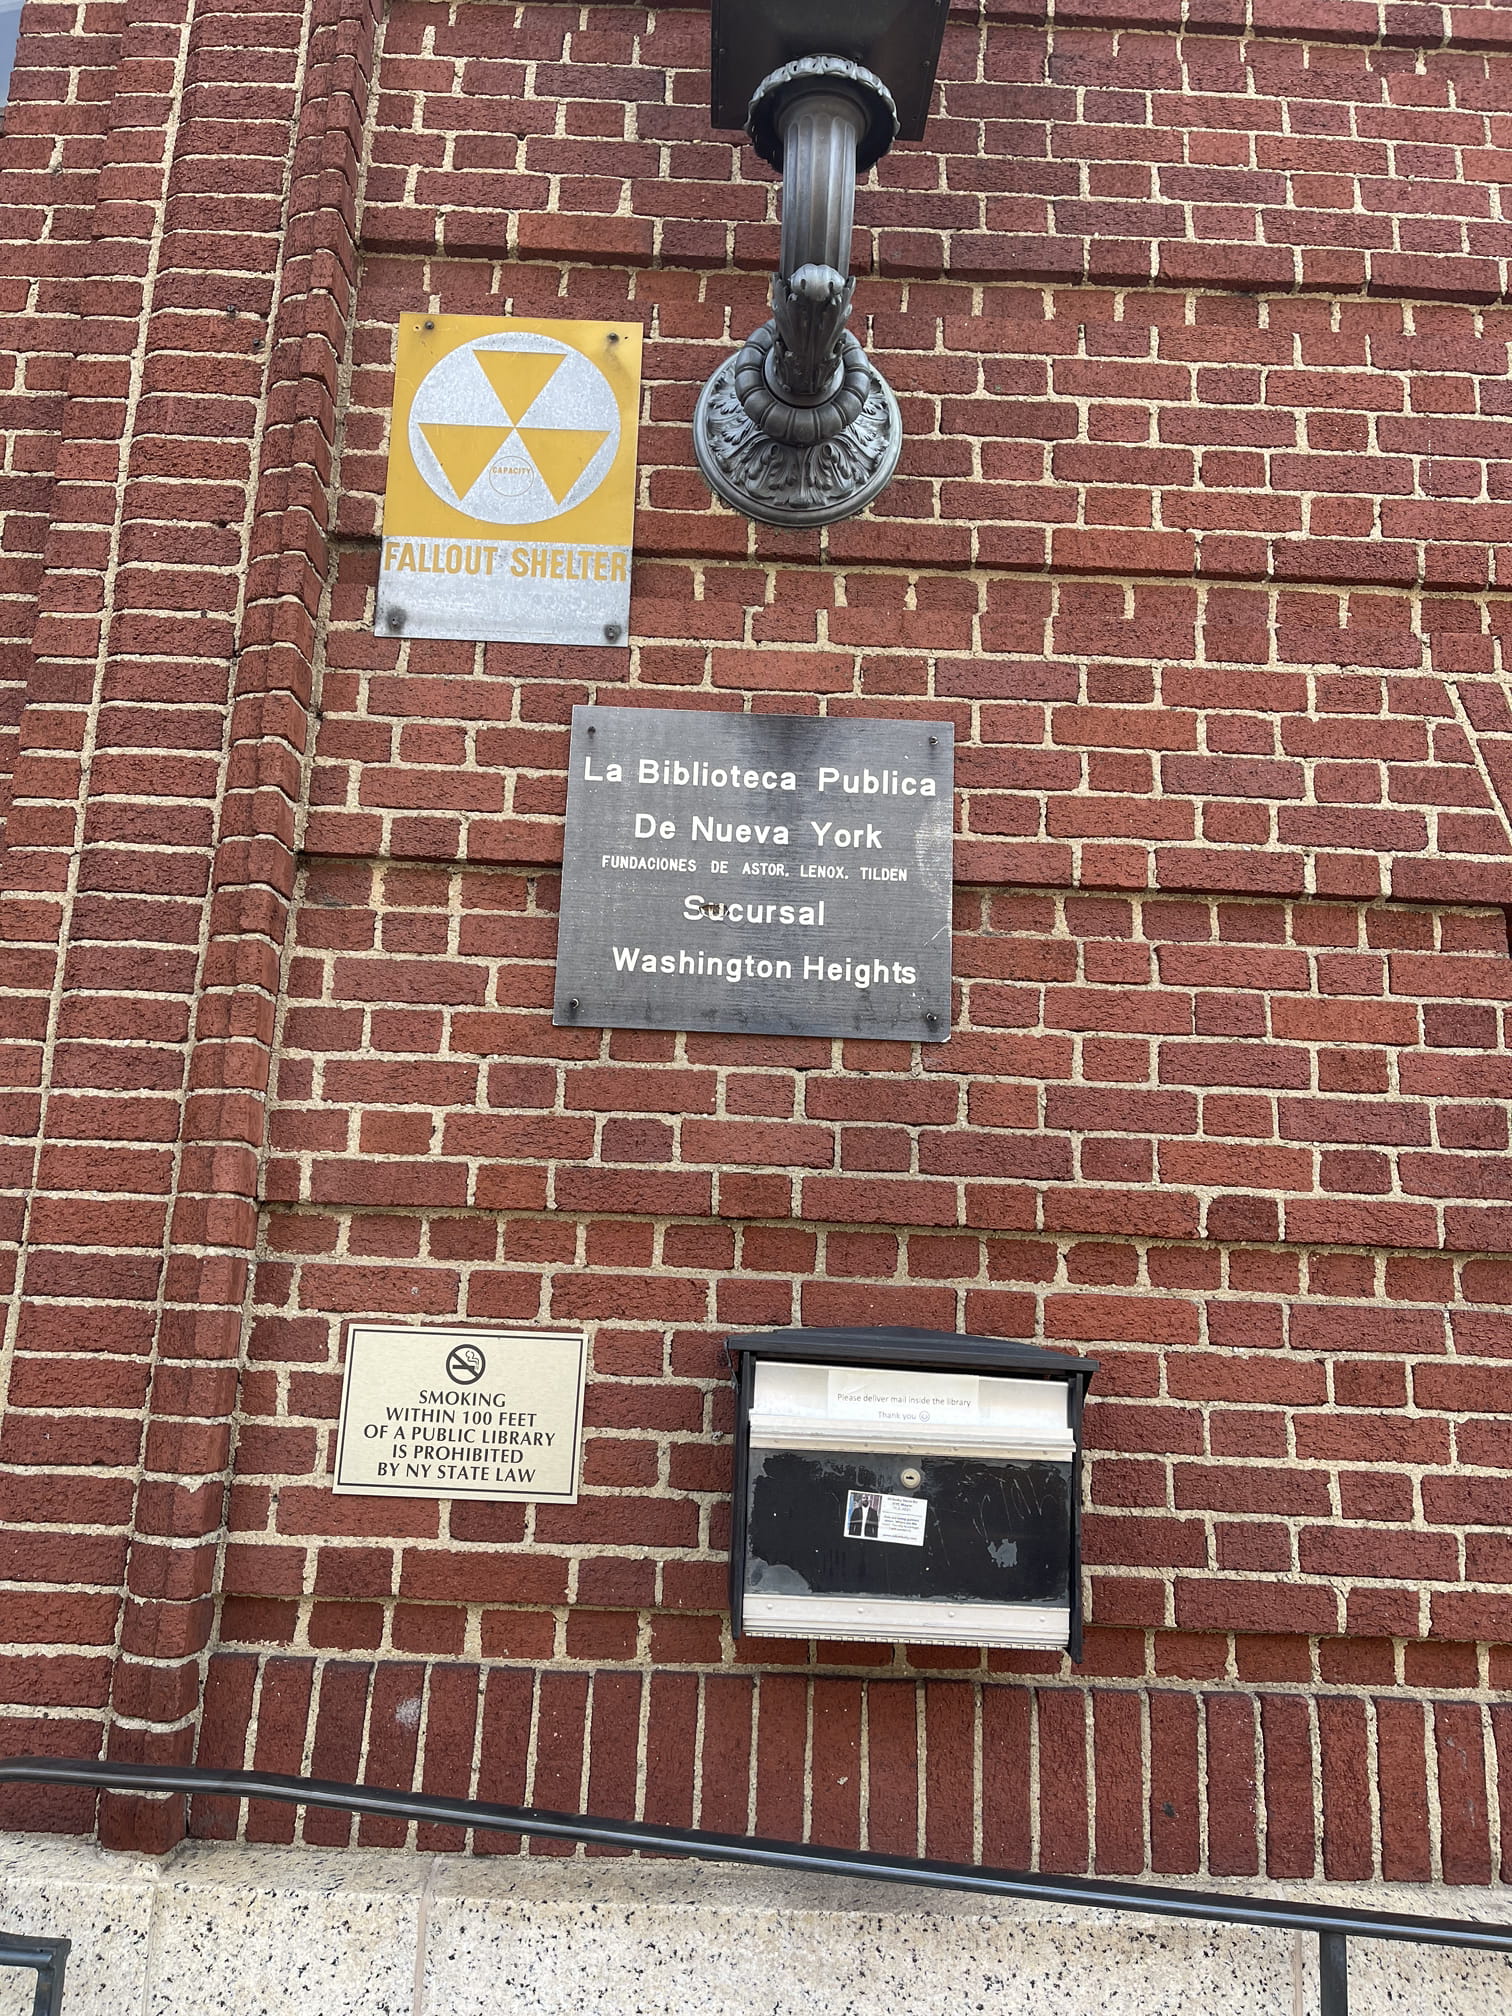 Washington heights library is also a fallout shelter